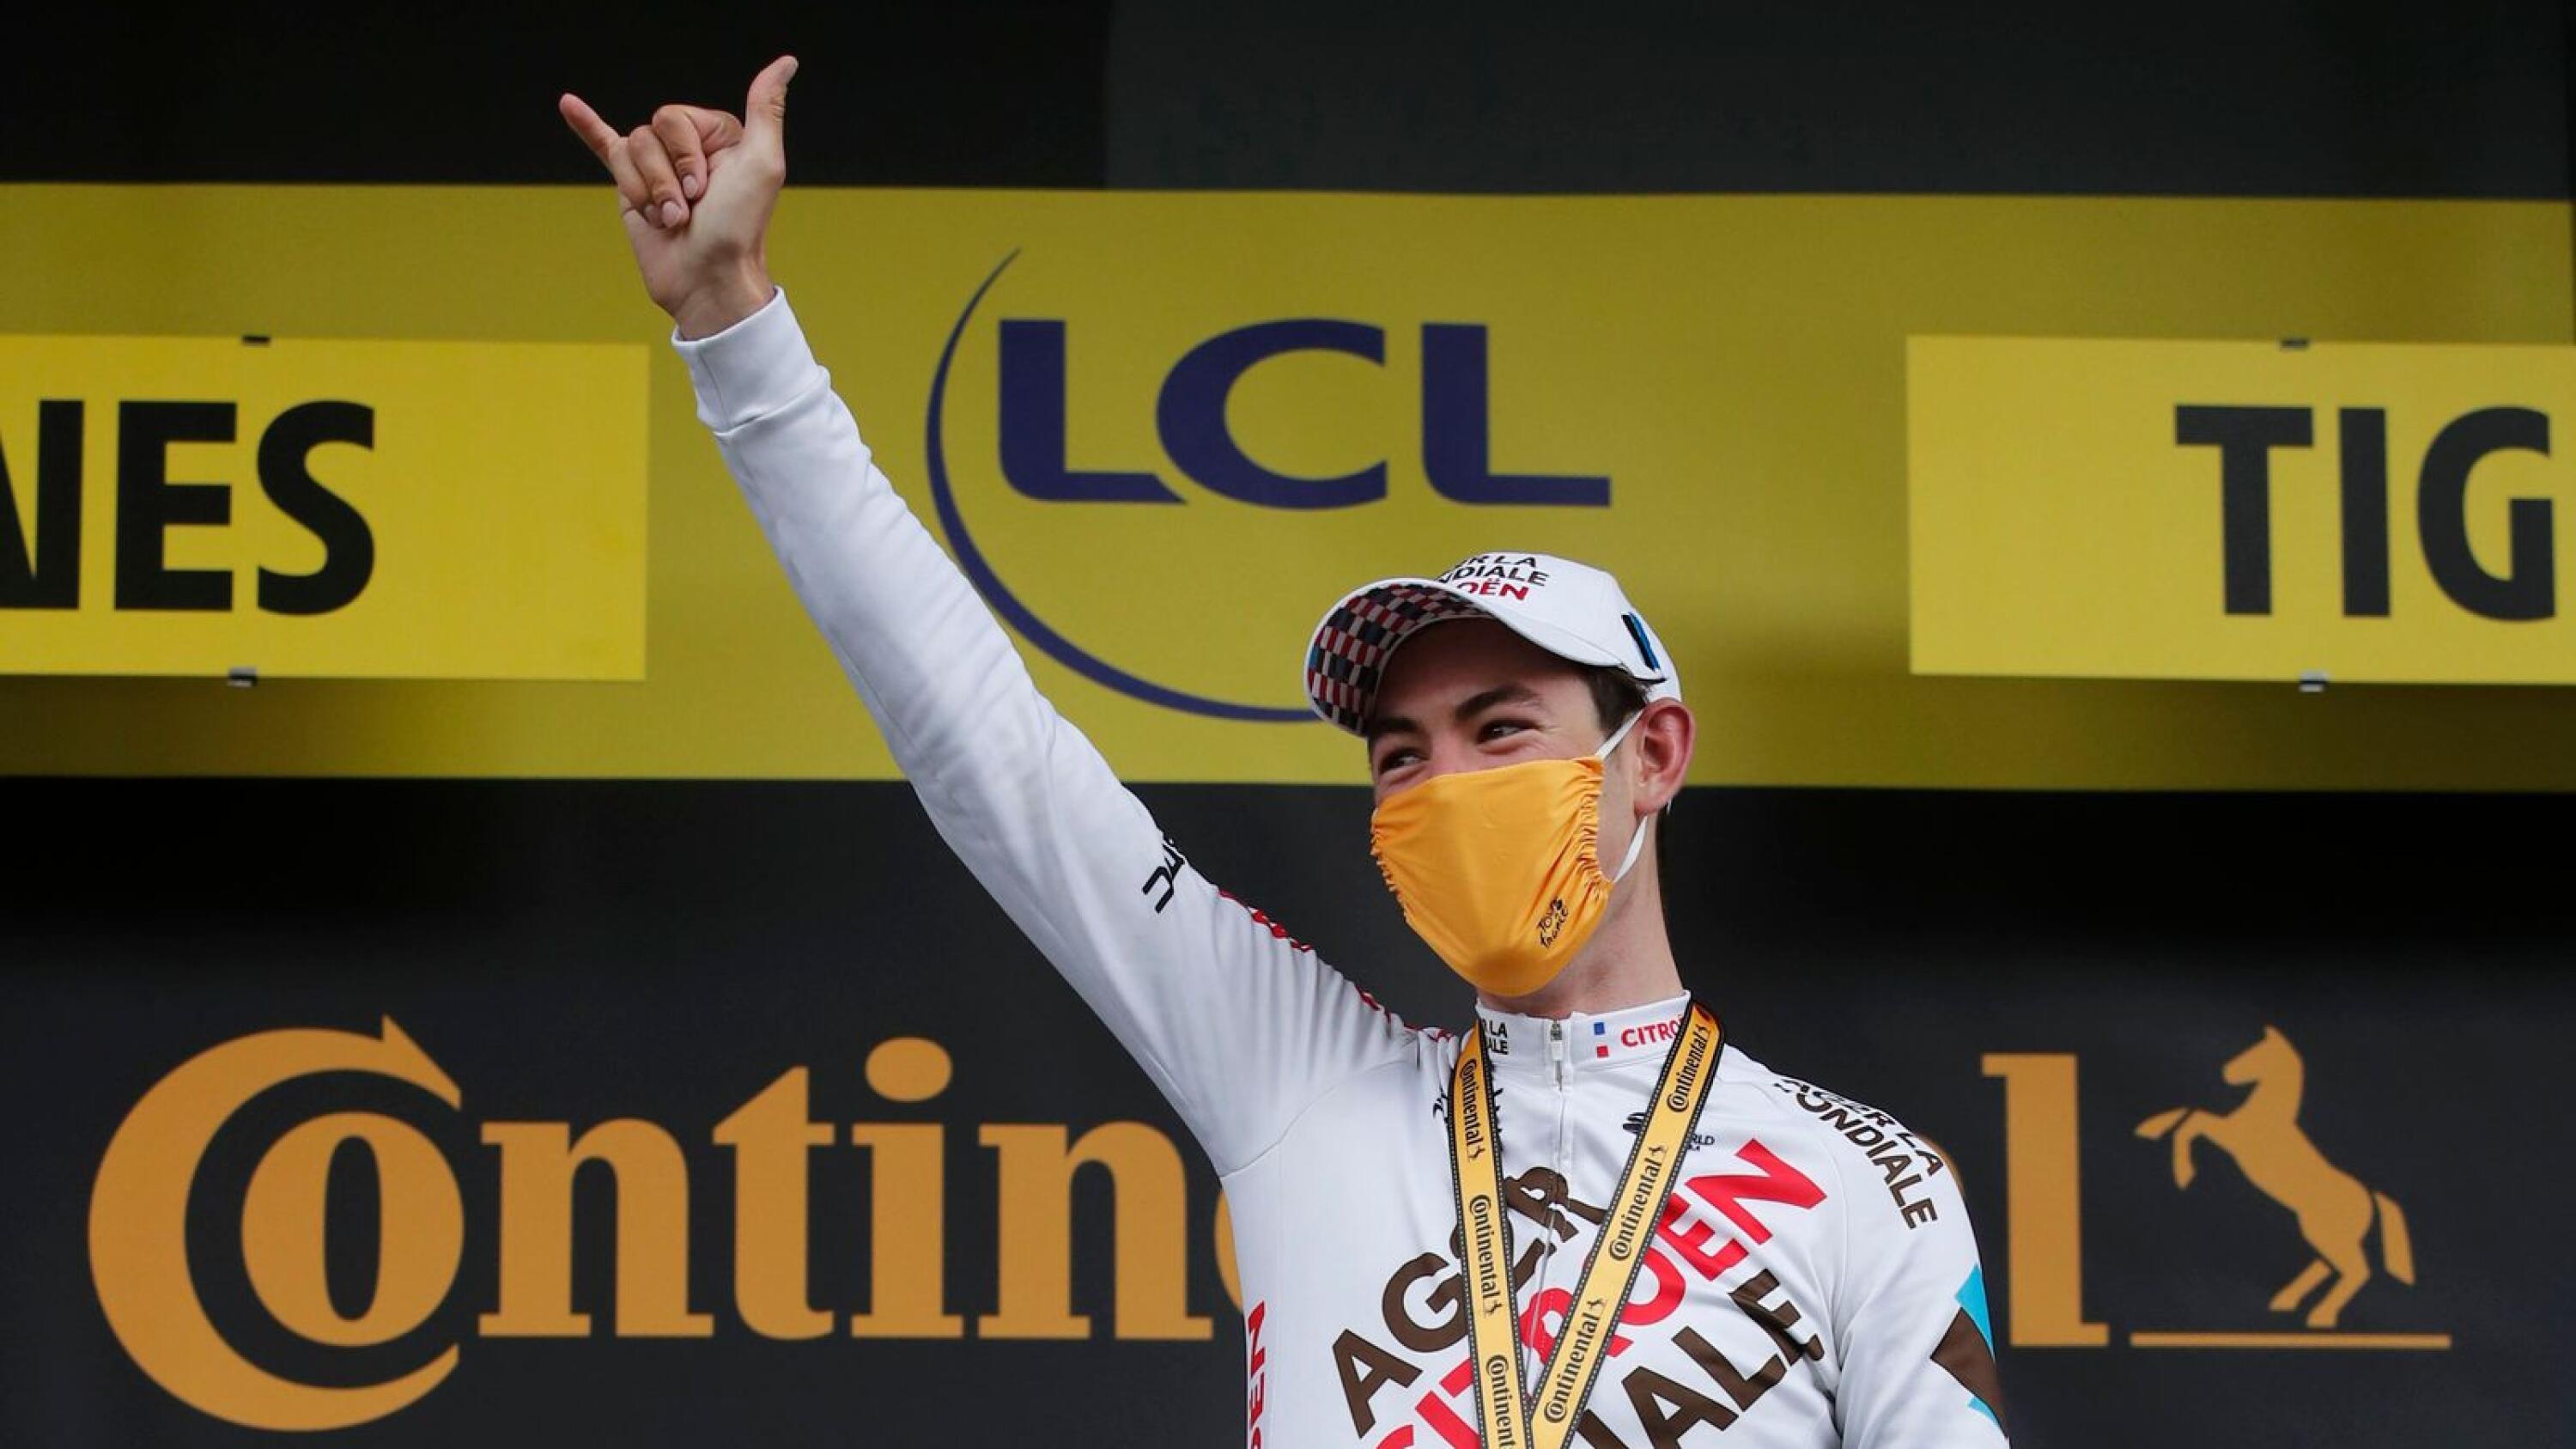 AG2R Citroen Team rider Ben O'Connor of Australia celebrates on the podium after winning stage 9 of the Tour de France on Sunday